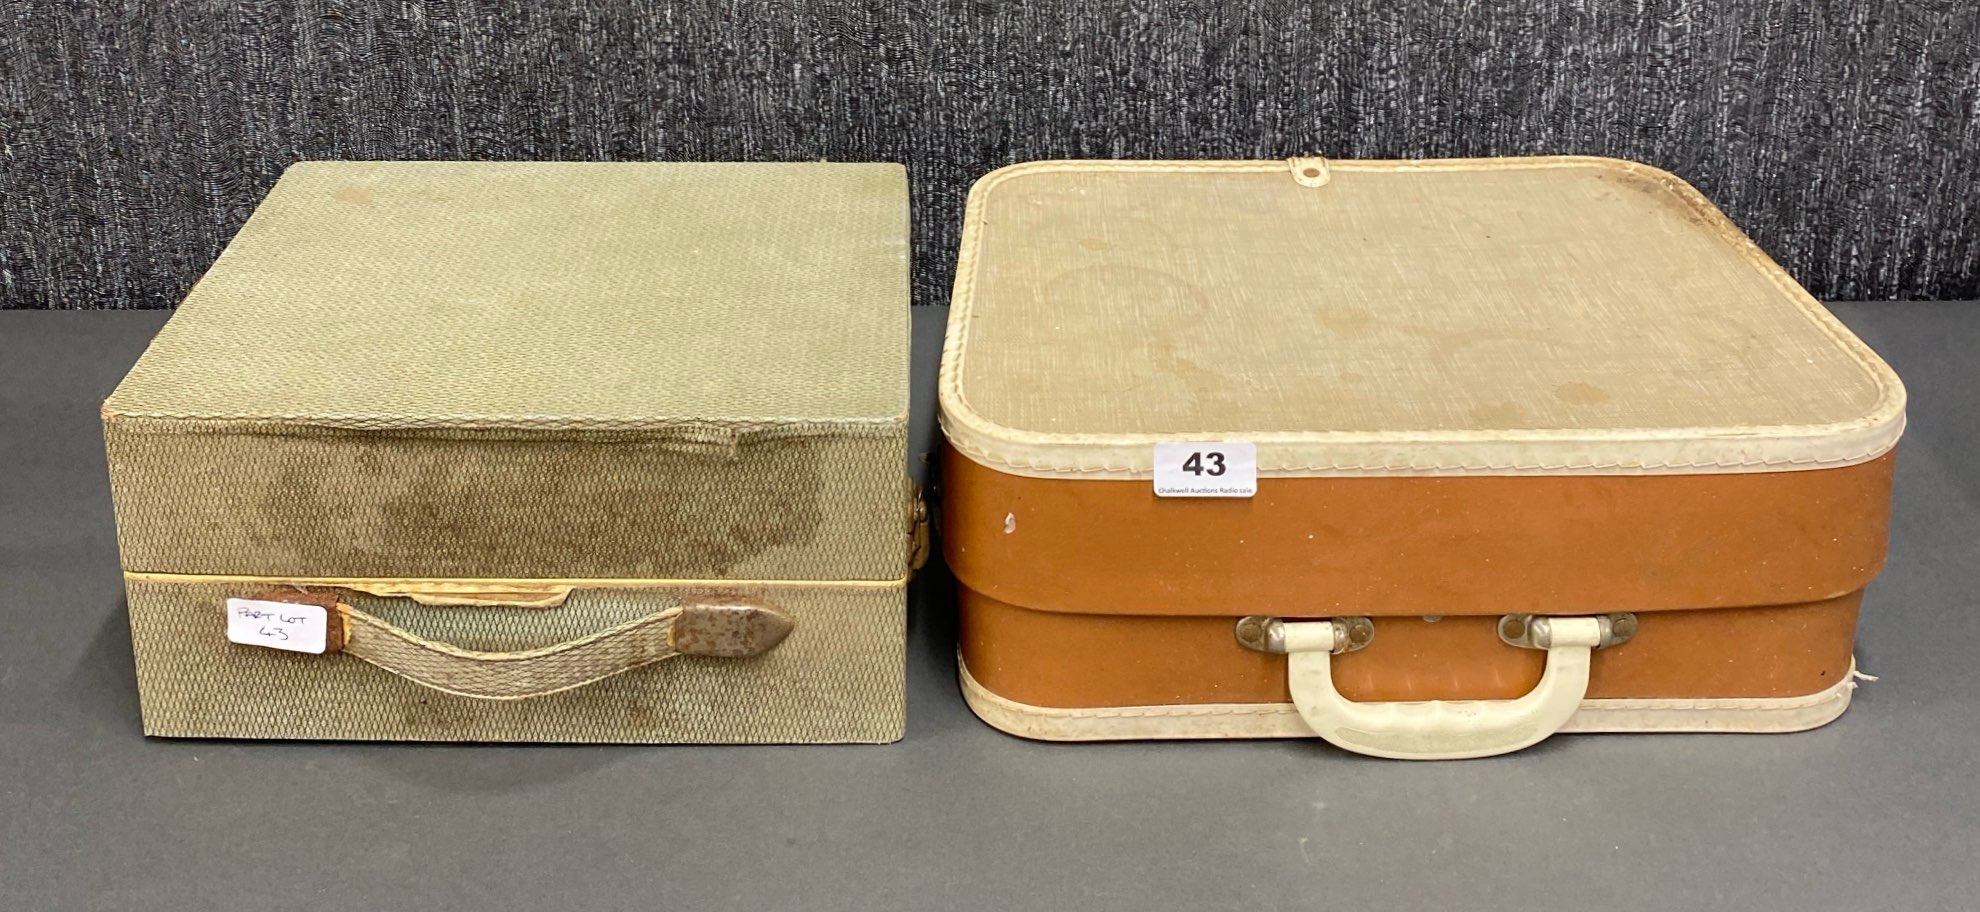 A cased Portandyne together with a cased Portagram serial number 5754, portable record players. - Image 2 of 2